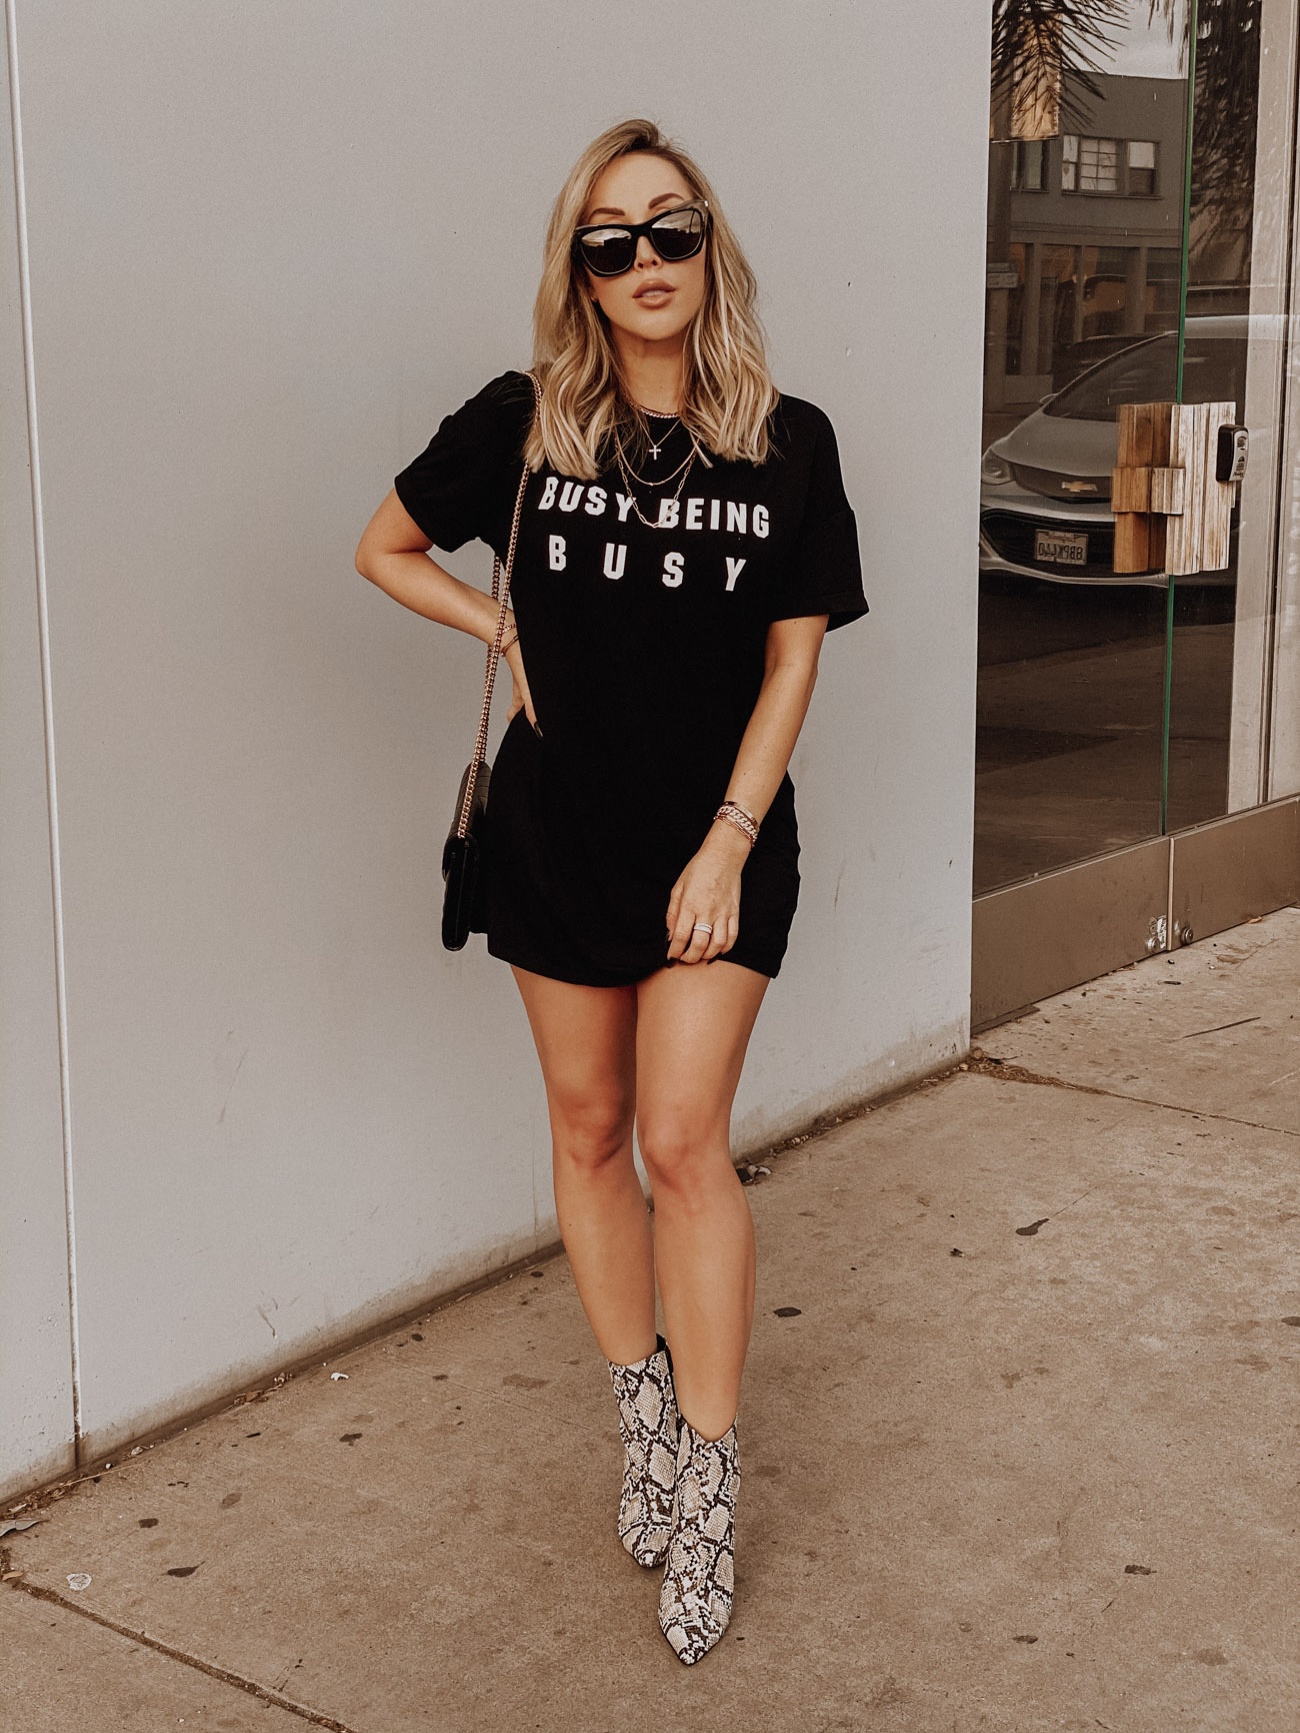 Busy Being Busy | Revolve | T-shirt Dress | Faux Snake Skin Boots | YSL sunglasses | LA Street Style | Blondie in the City by Hayley Larue